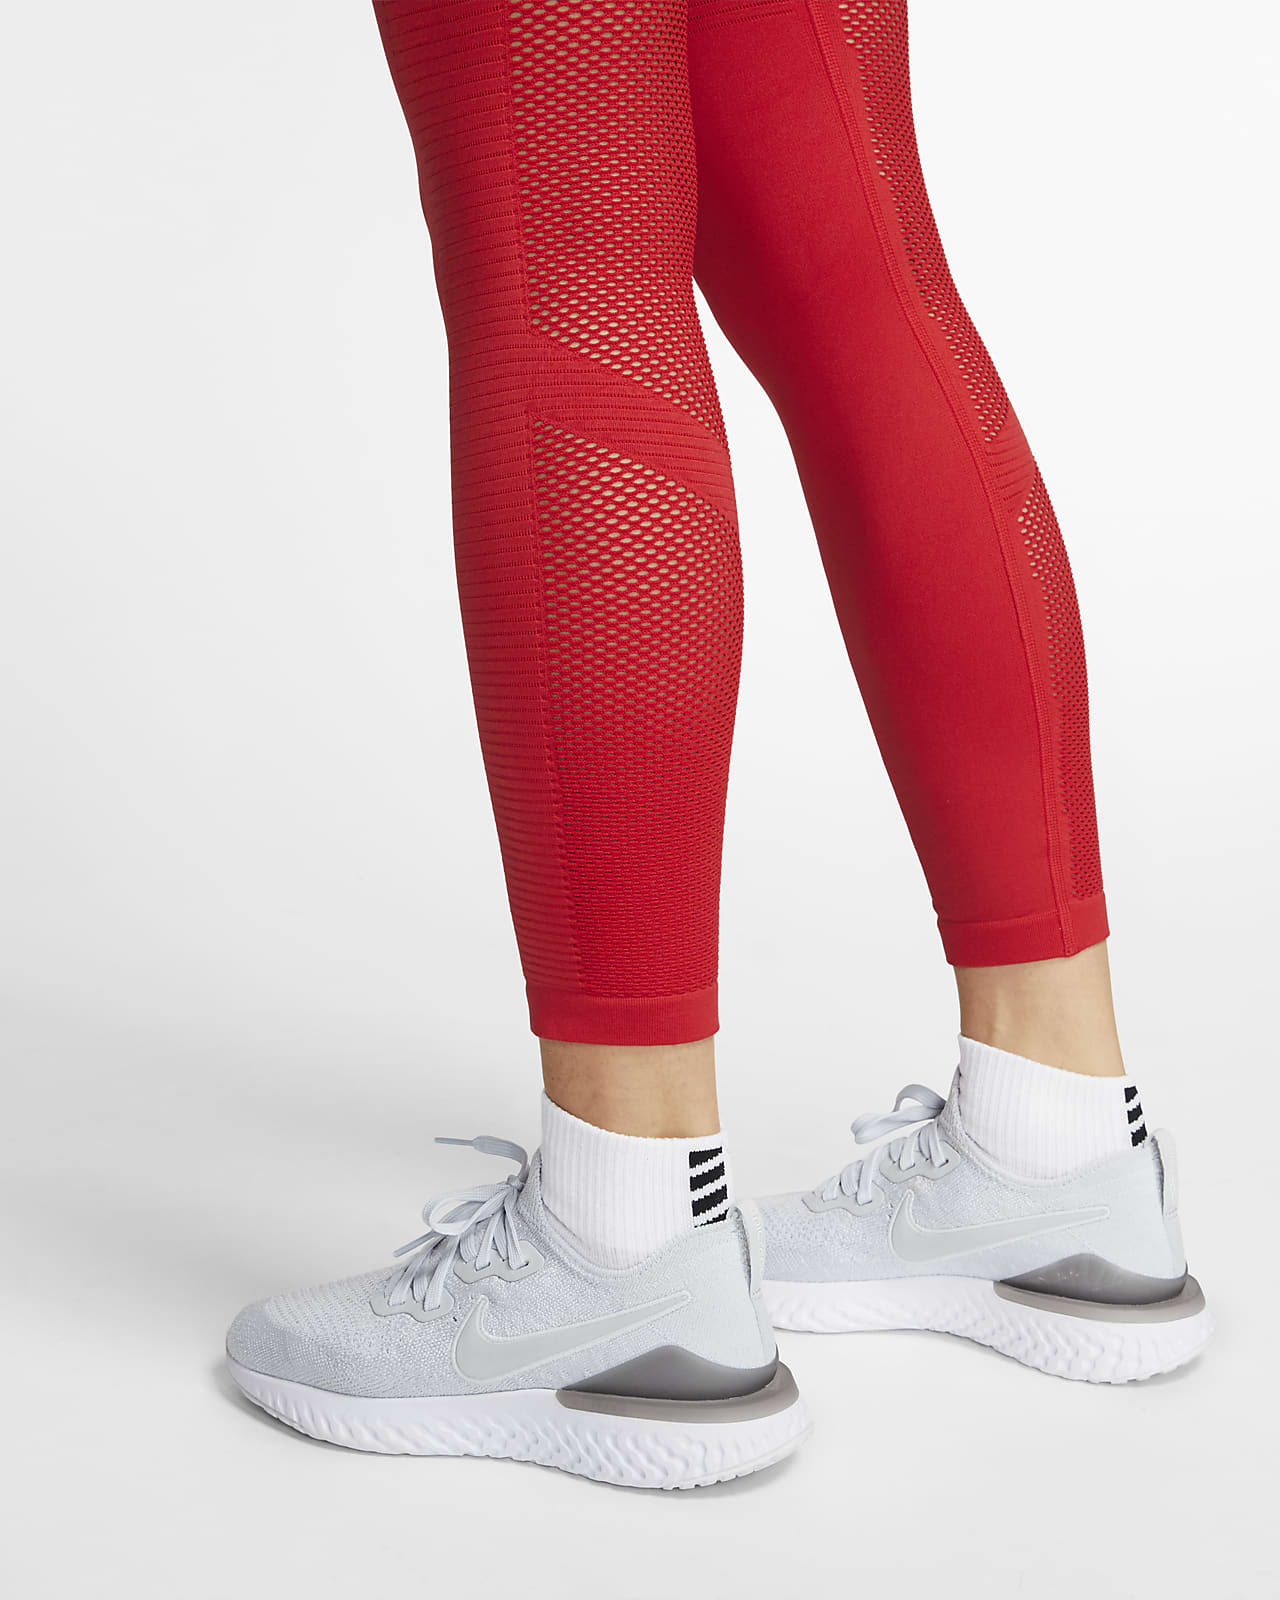 red nike tights womens